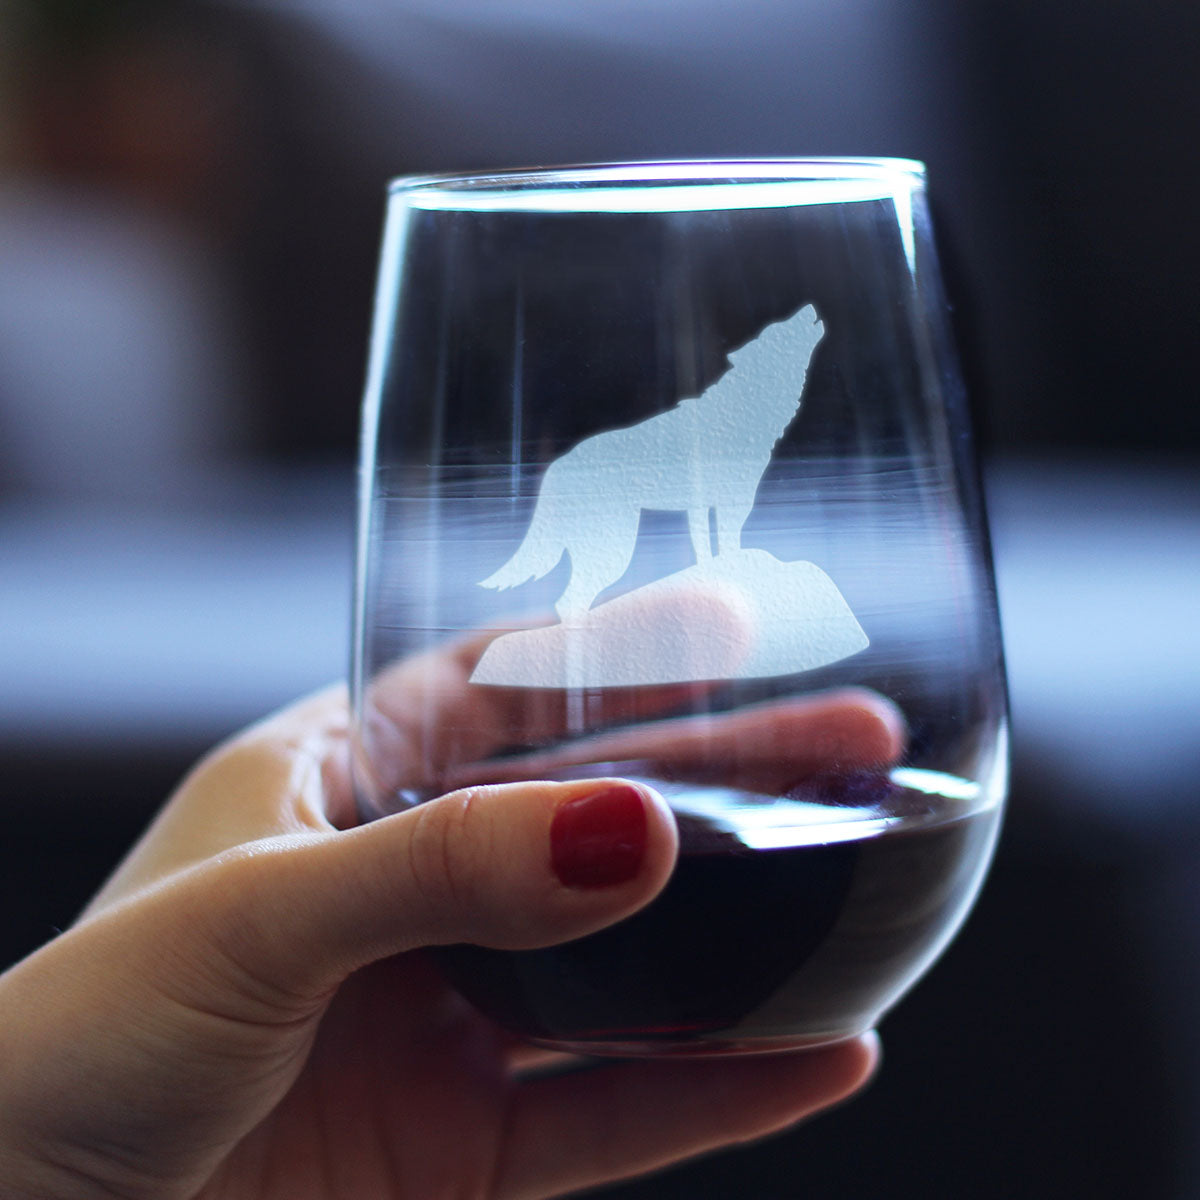 Wolf Stemless Wine Glass - Cabin Themed Gifts or Rustic Decor for Women and Men - Engraved Silhouette - Large